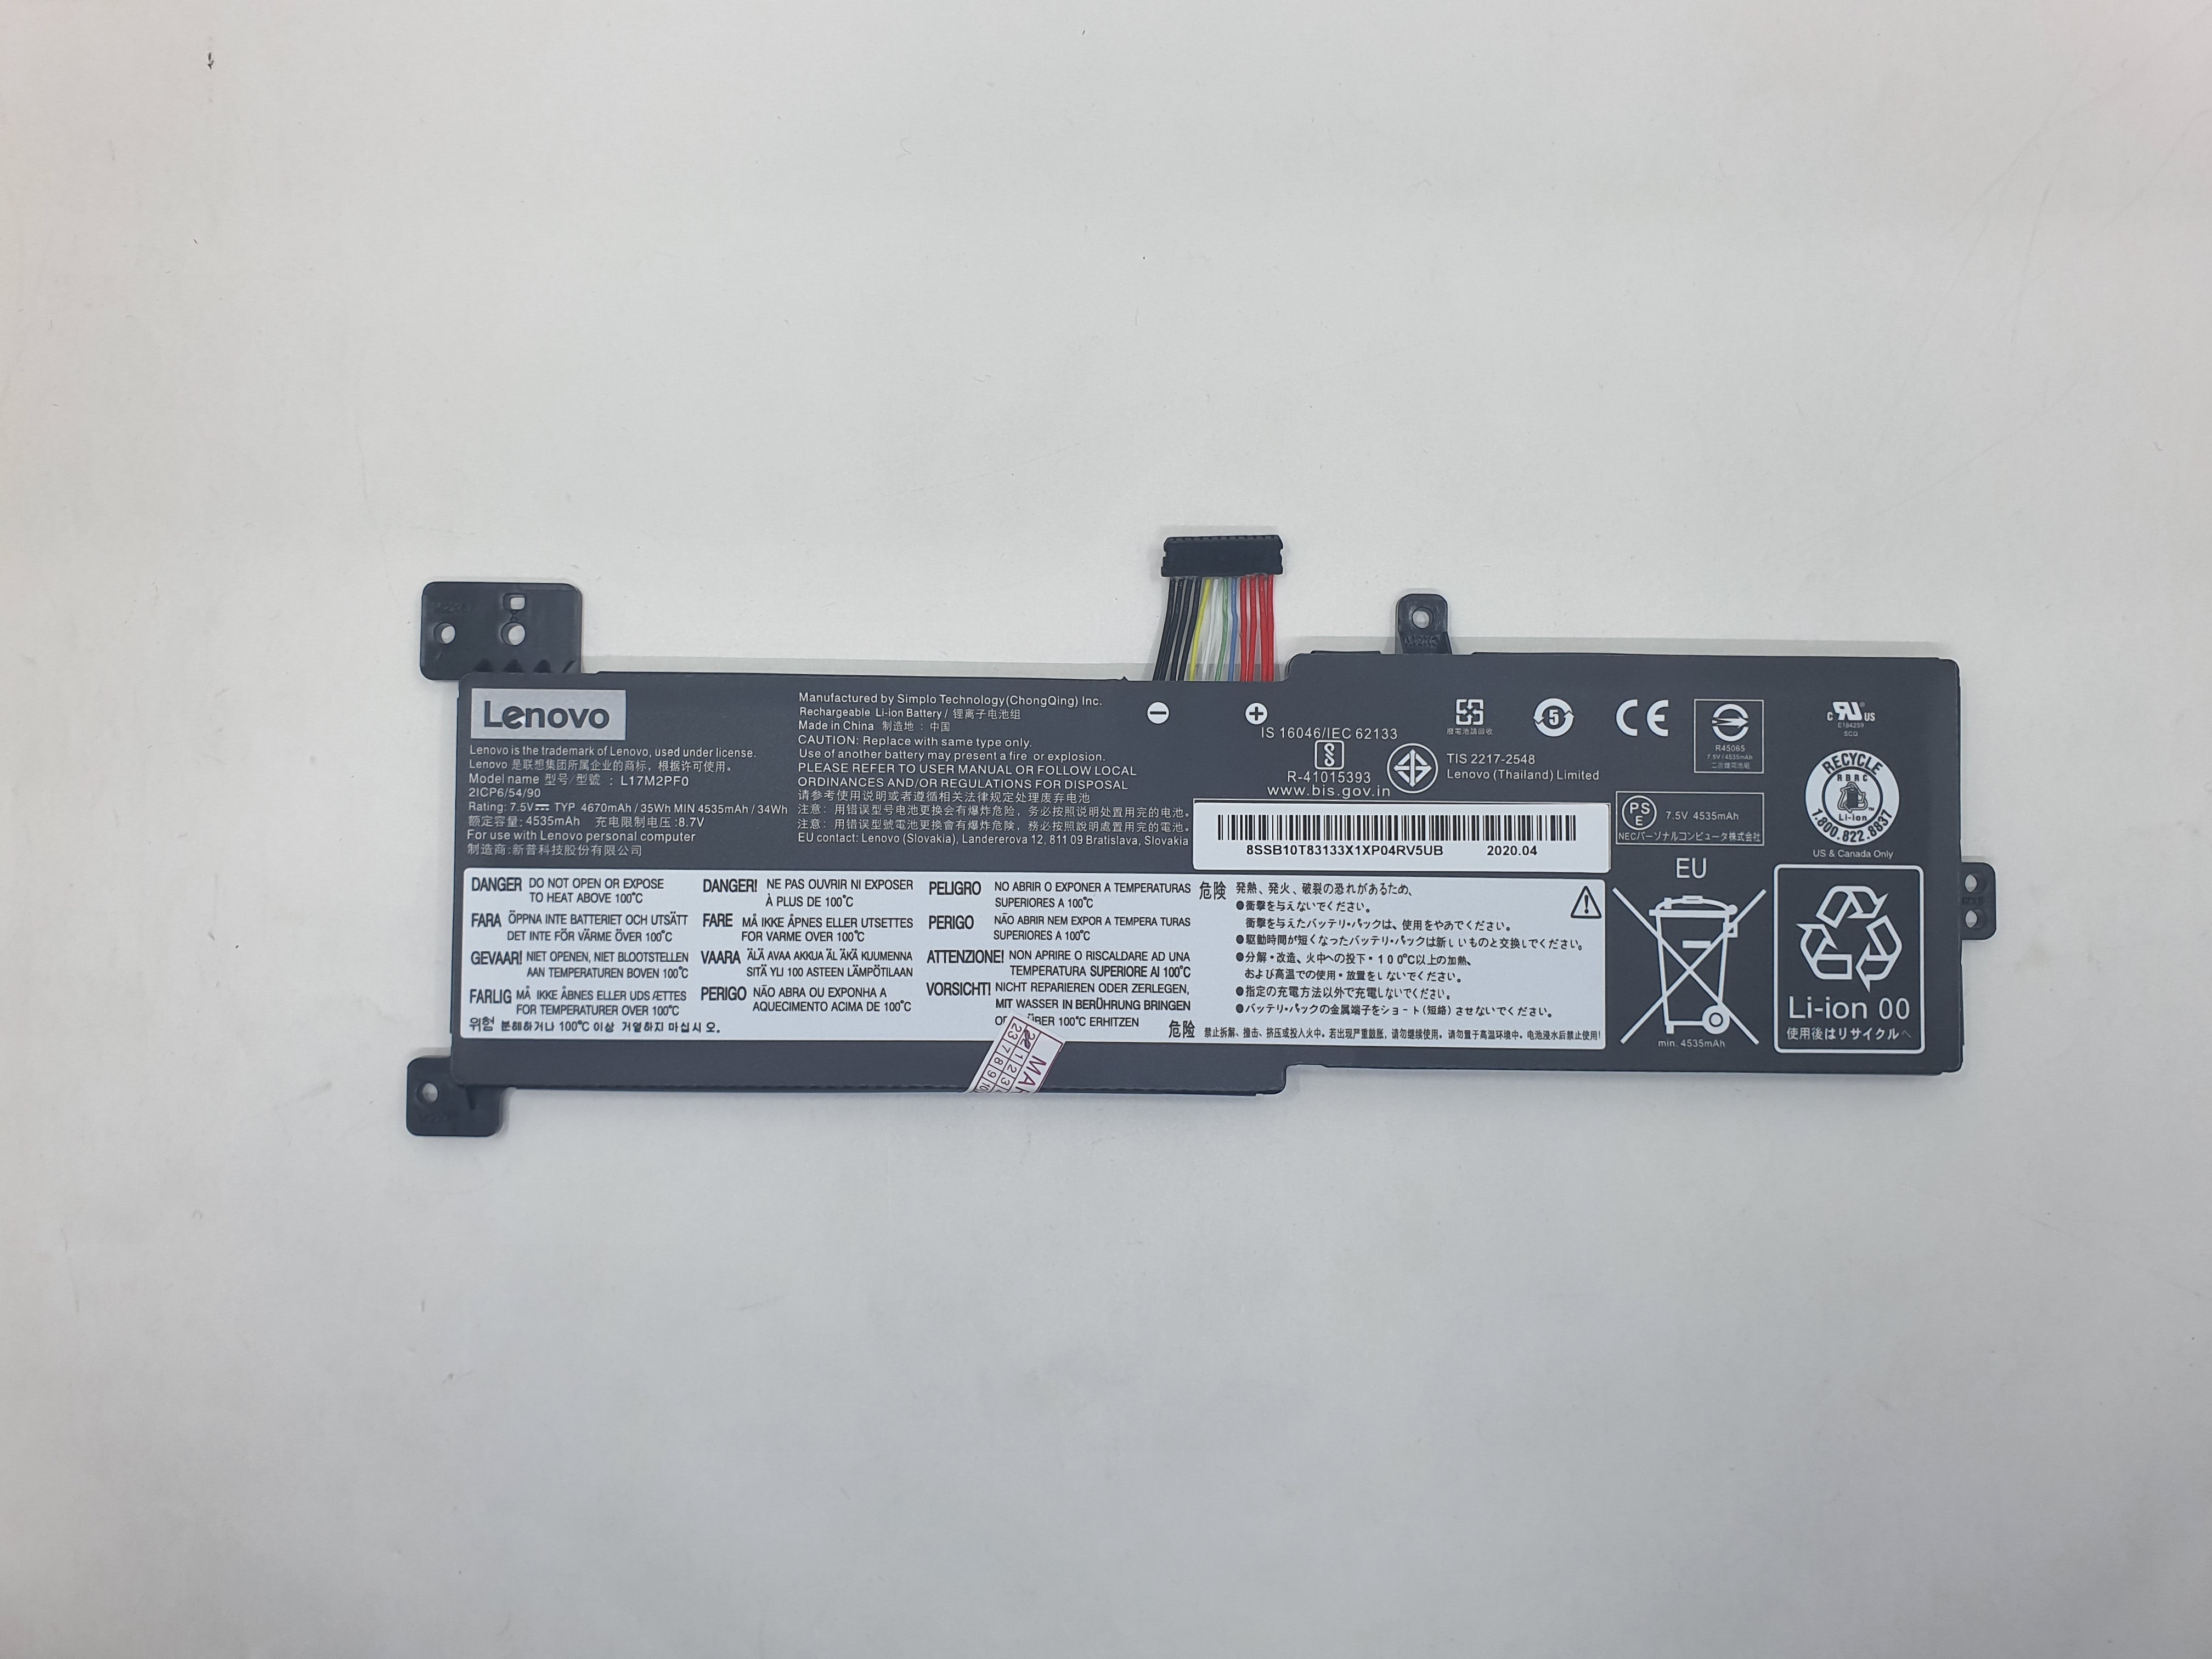 Lenovo Battery 330-15IKB A1 for Replacement - Lenovo IdeaPad 330-15IKB A1